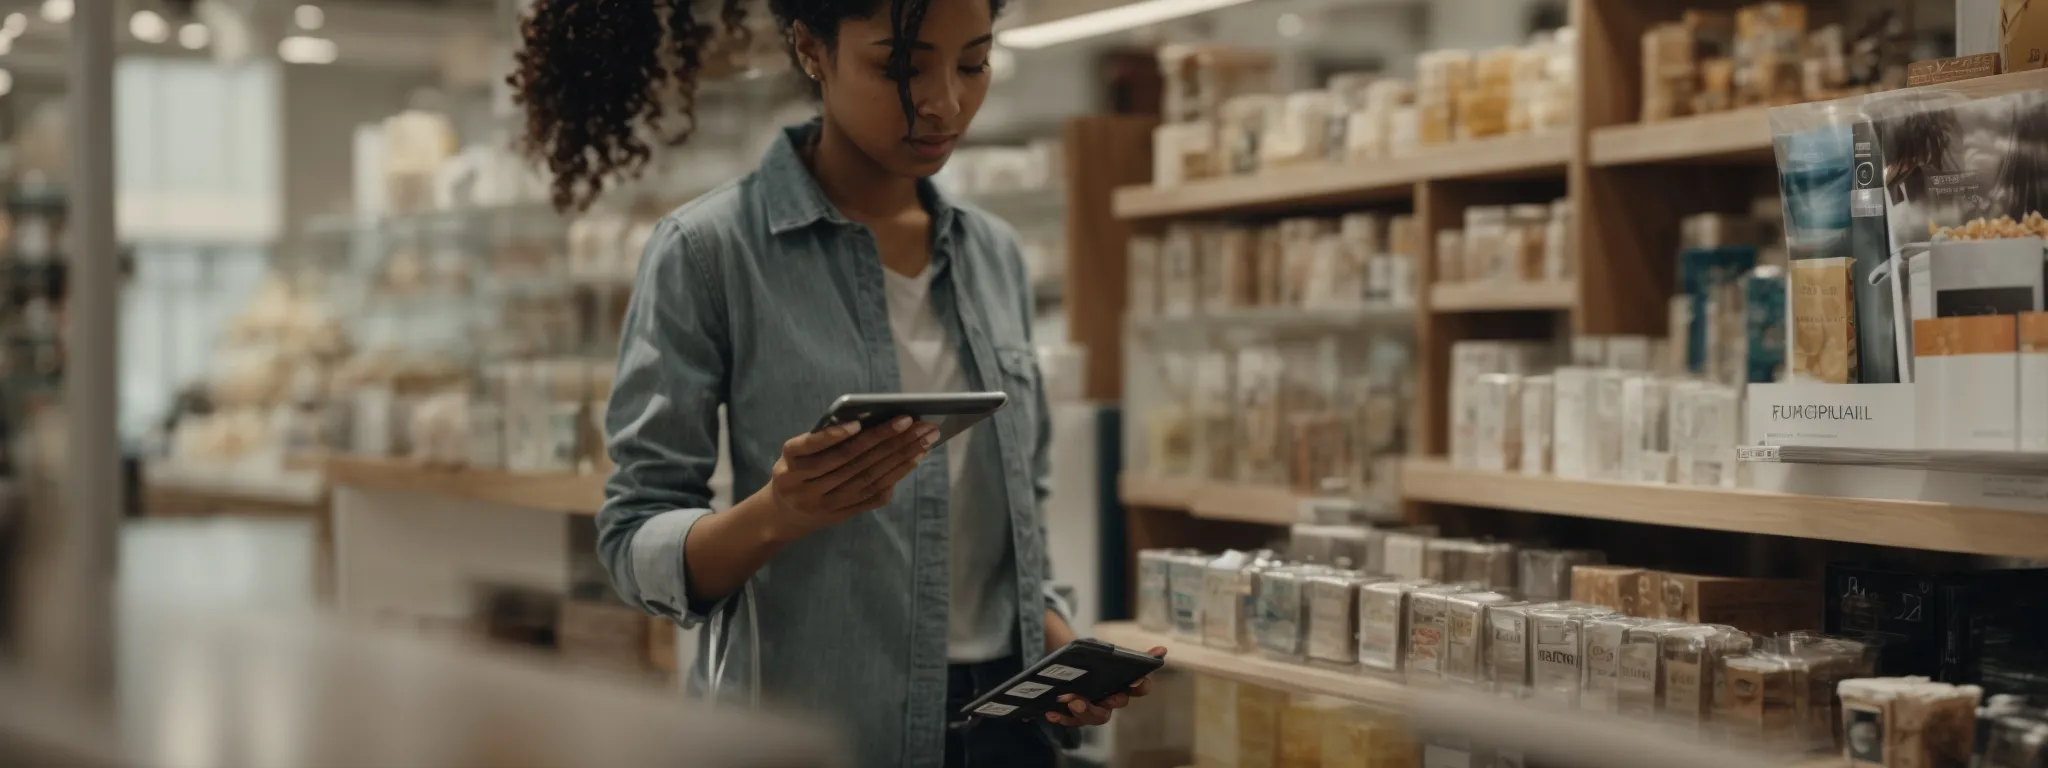 a busy shopper interacts with a sleek, user-friendly tablet interface showcasing an array of products.